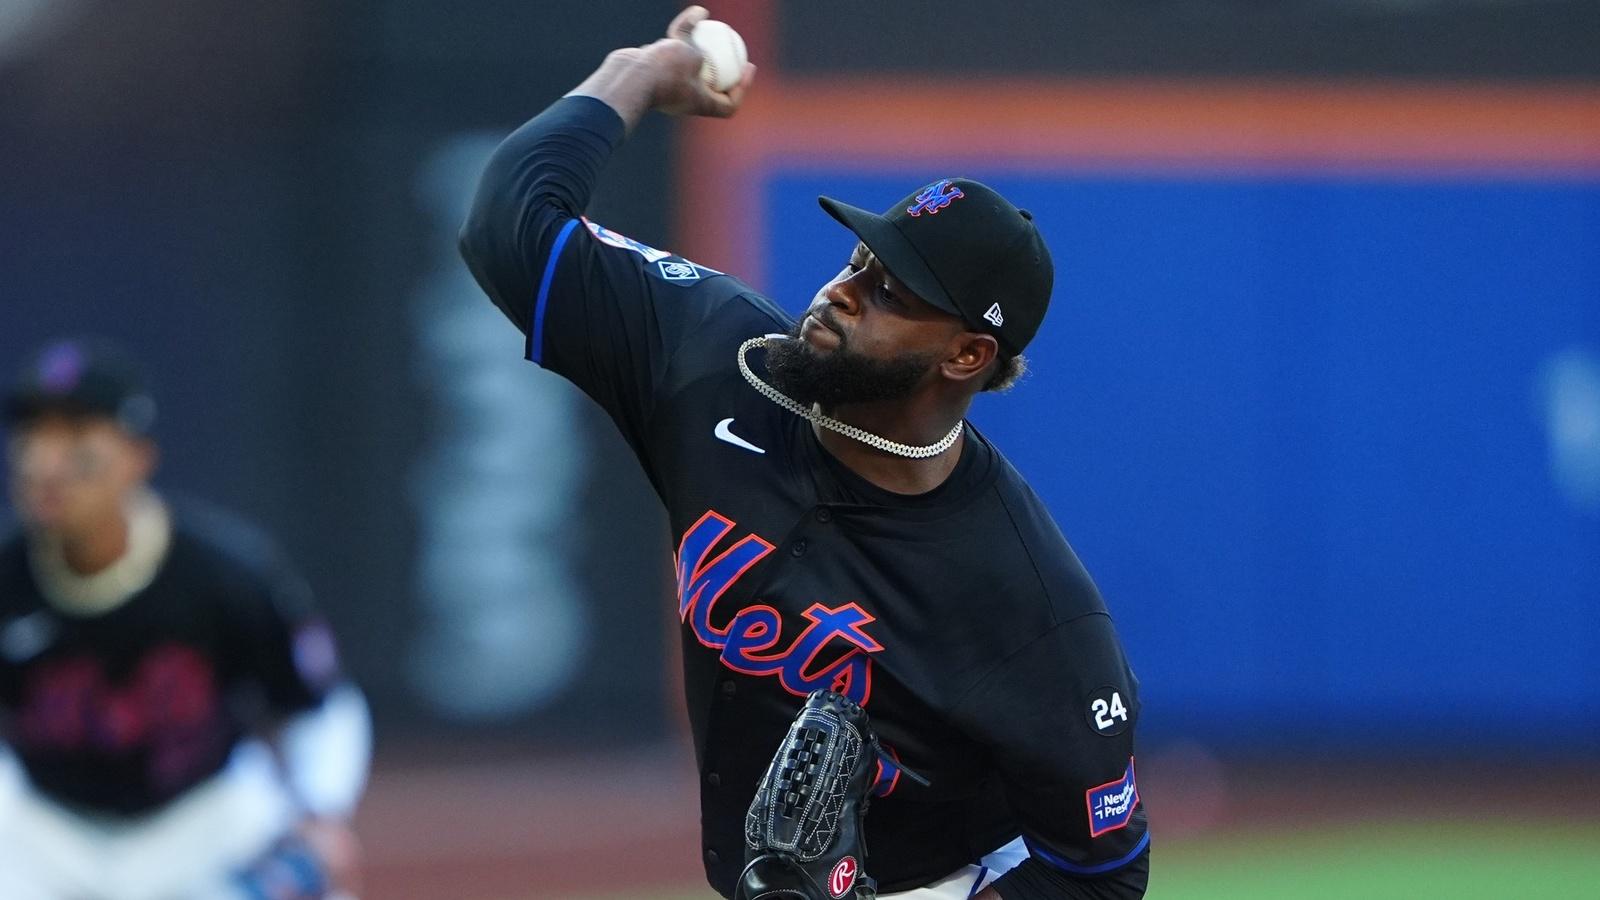 New York Mets pitcher Luis Severino (40) delivers a pitch against the Washington Nationals during the first inning at Citi Field.